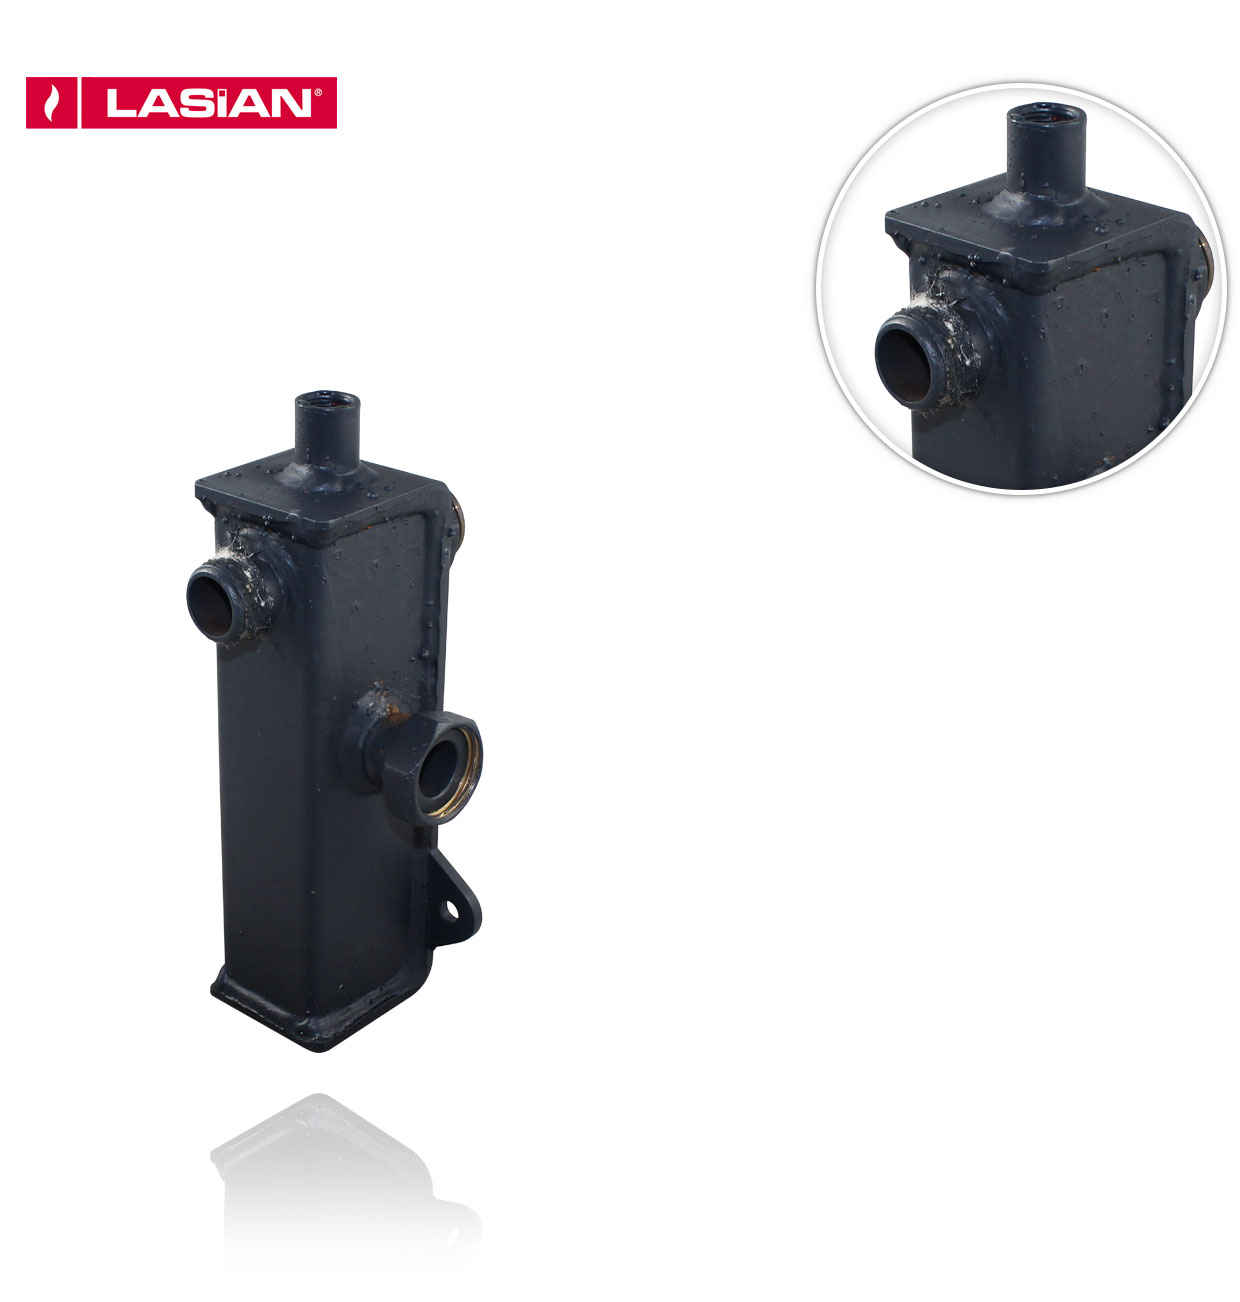 LASIAN 55128 MOUNTED AIR-CONDITIONING OUTPUT COLLECTOR